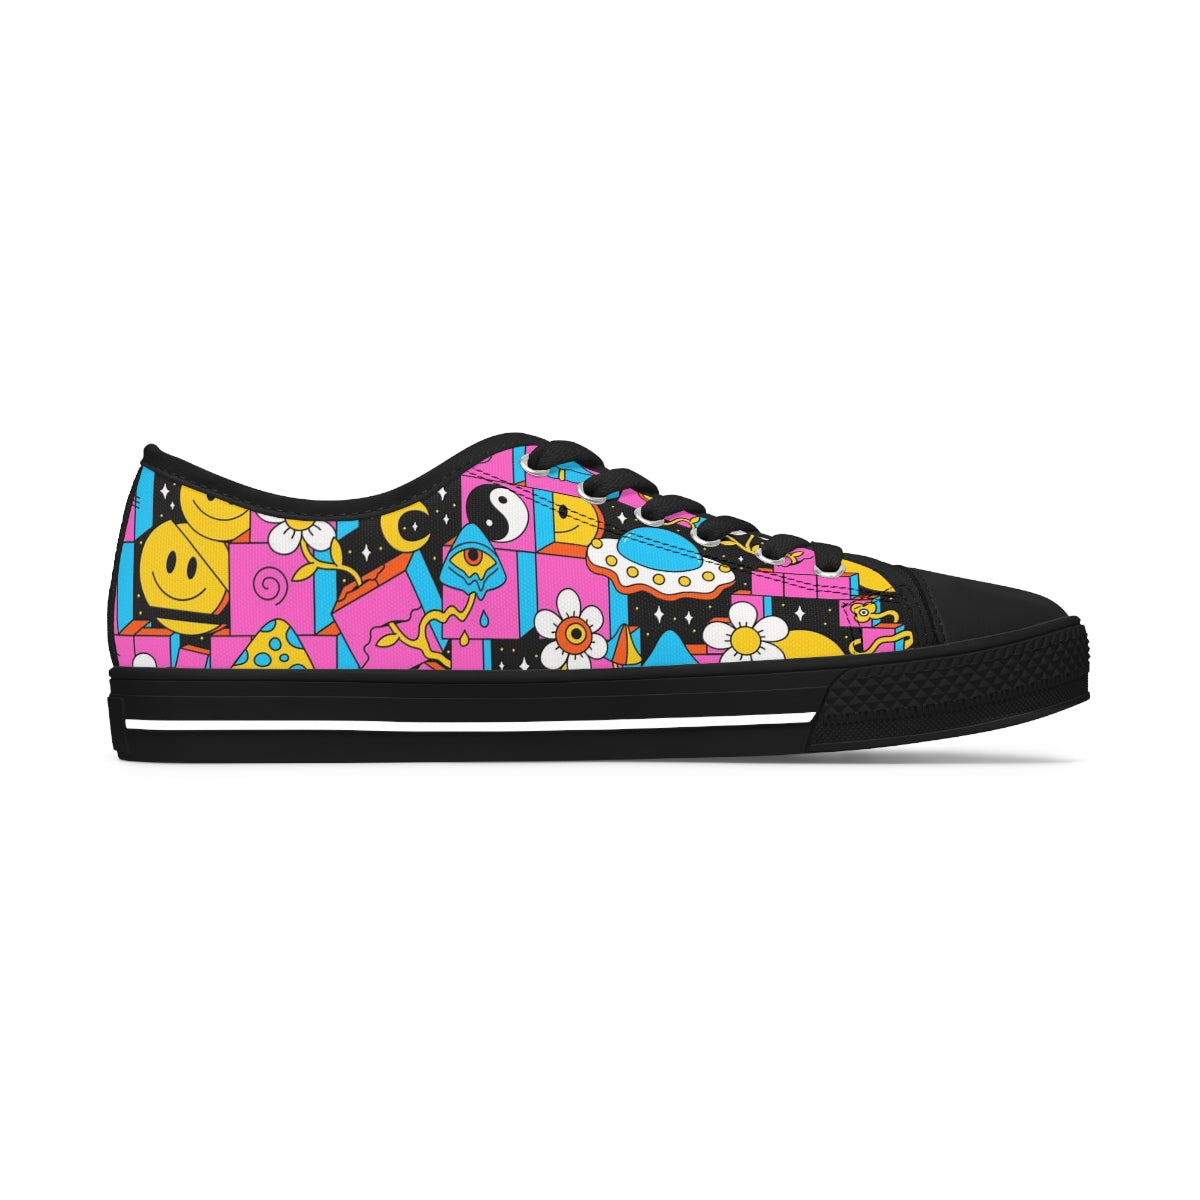 Acid Pink - Women's Low Top Sneakers ( Black or White Sole )